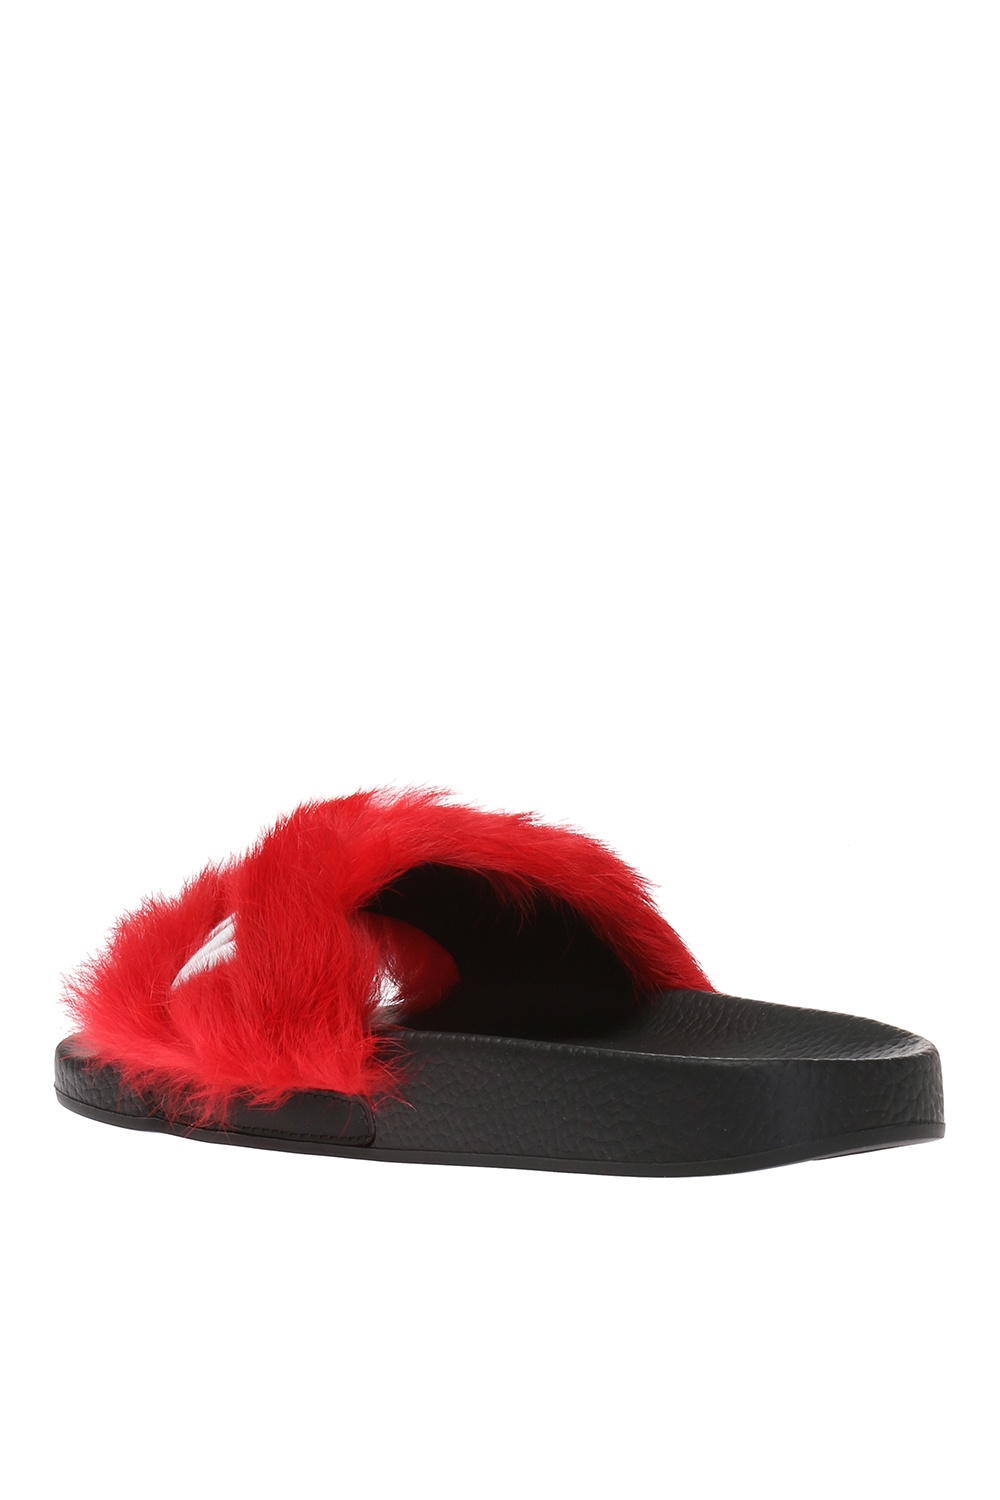 dsquared2 slippers